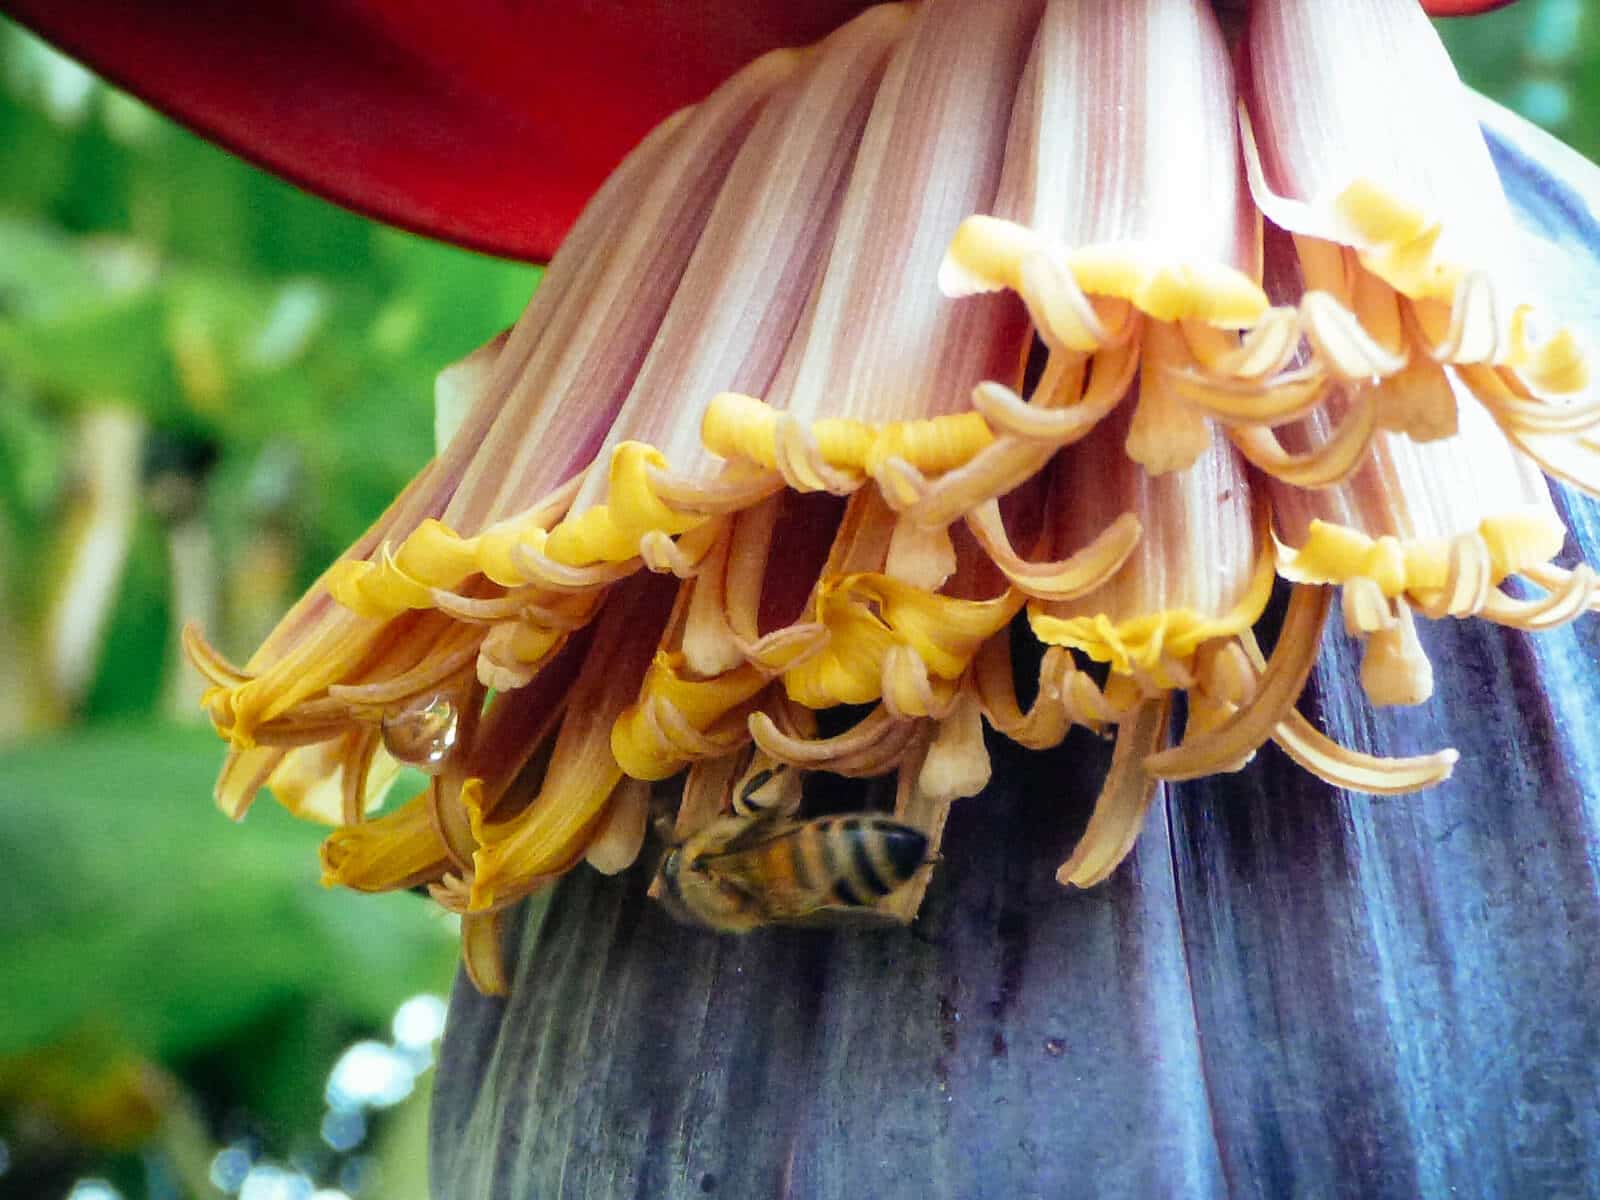 Banana blossoms are rich in nectar and great for attracting bees